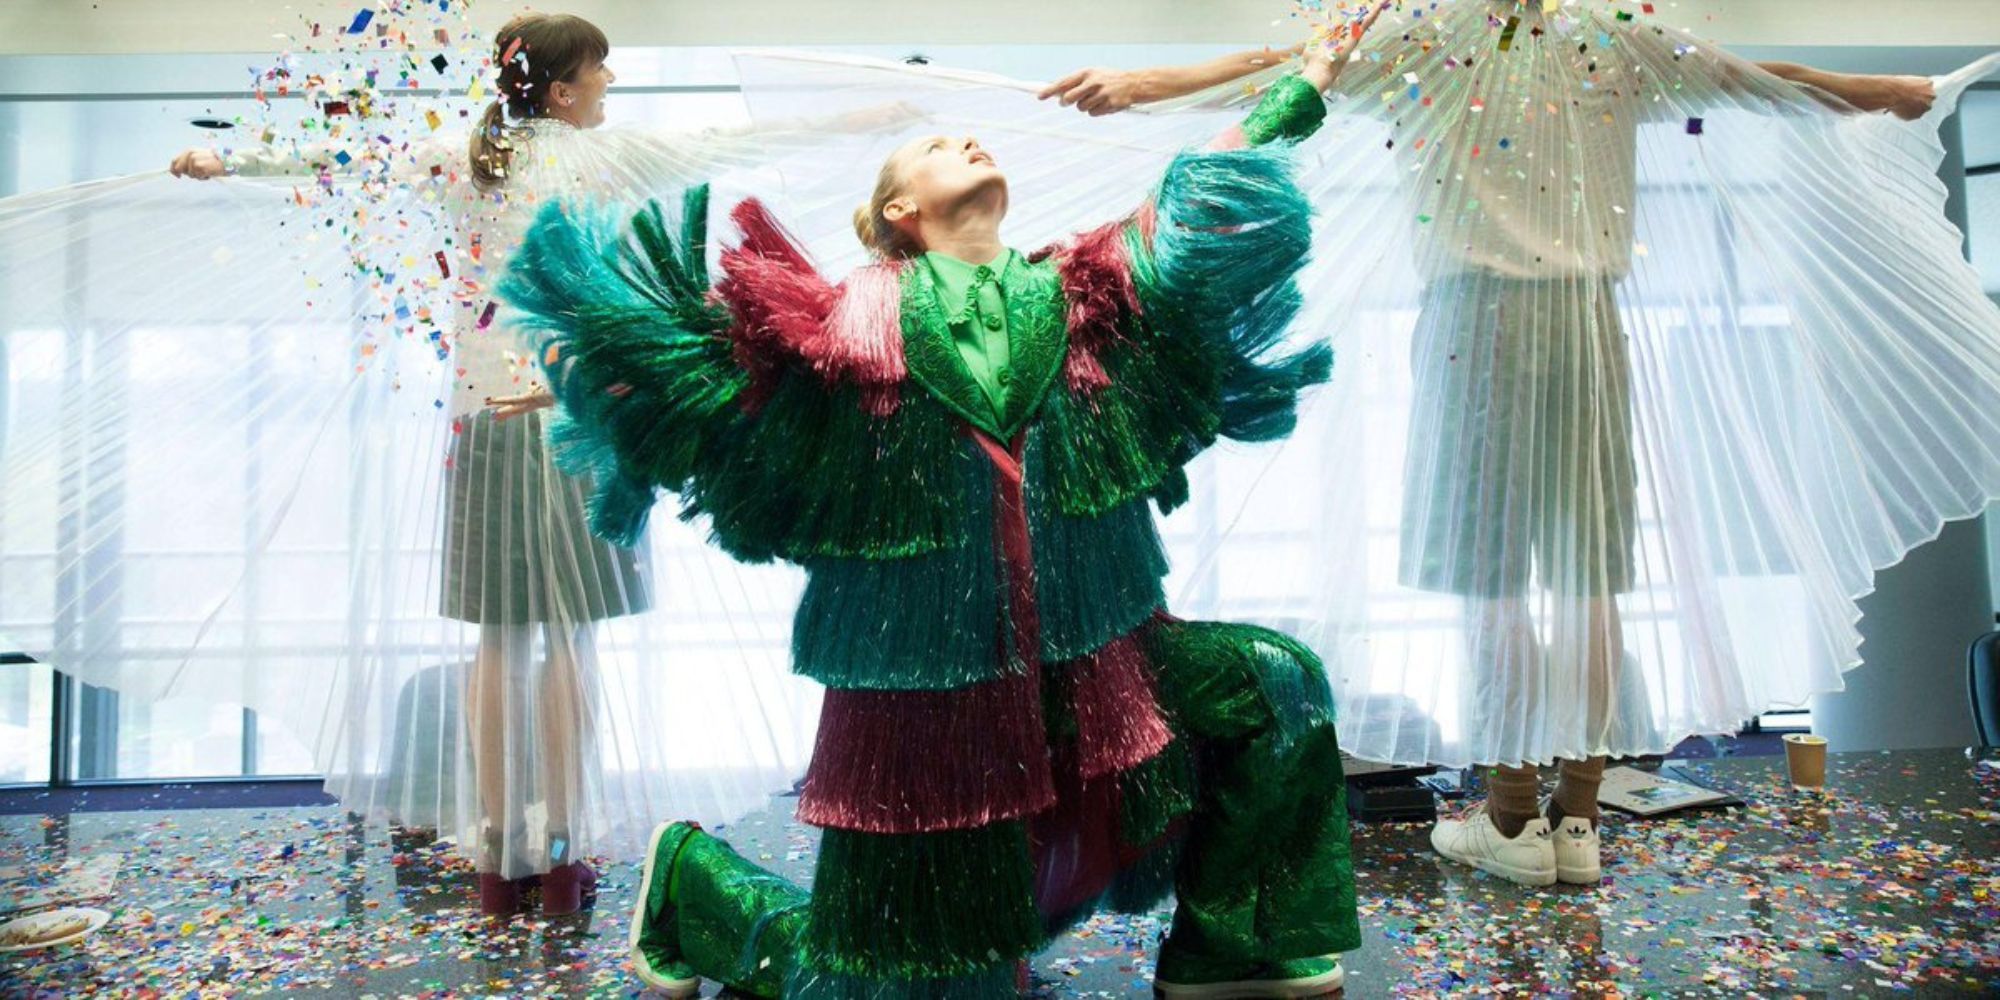 Kit wearing a shiny streamer suit throwing confetti in the air